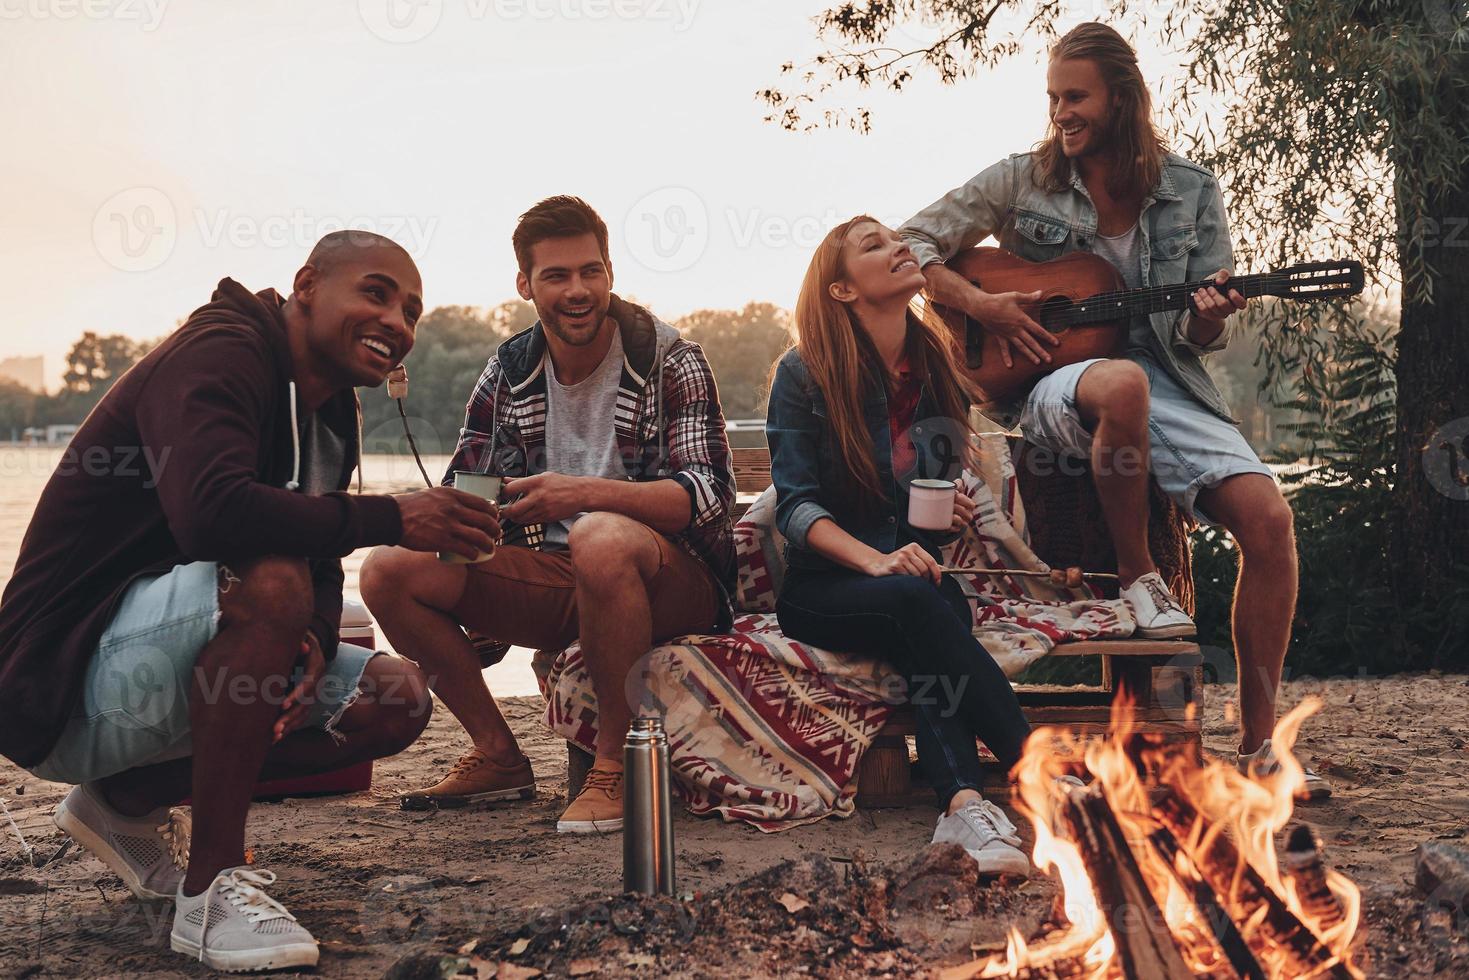 Carefree camping. Group of young people in casual wear smiling while enjoying beach party near the campfire photo